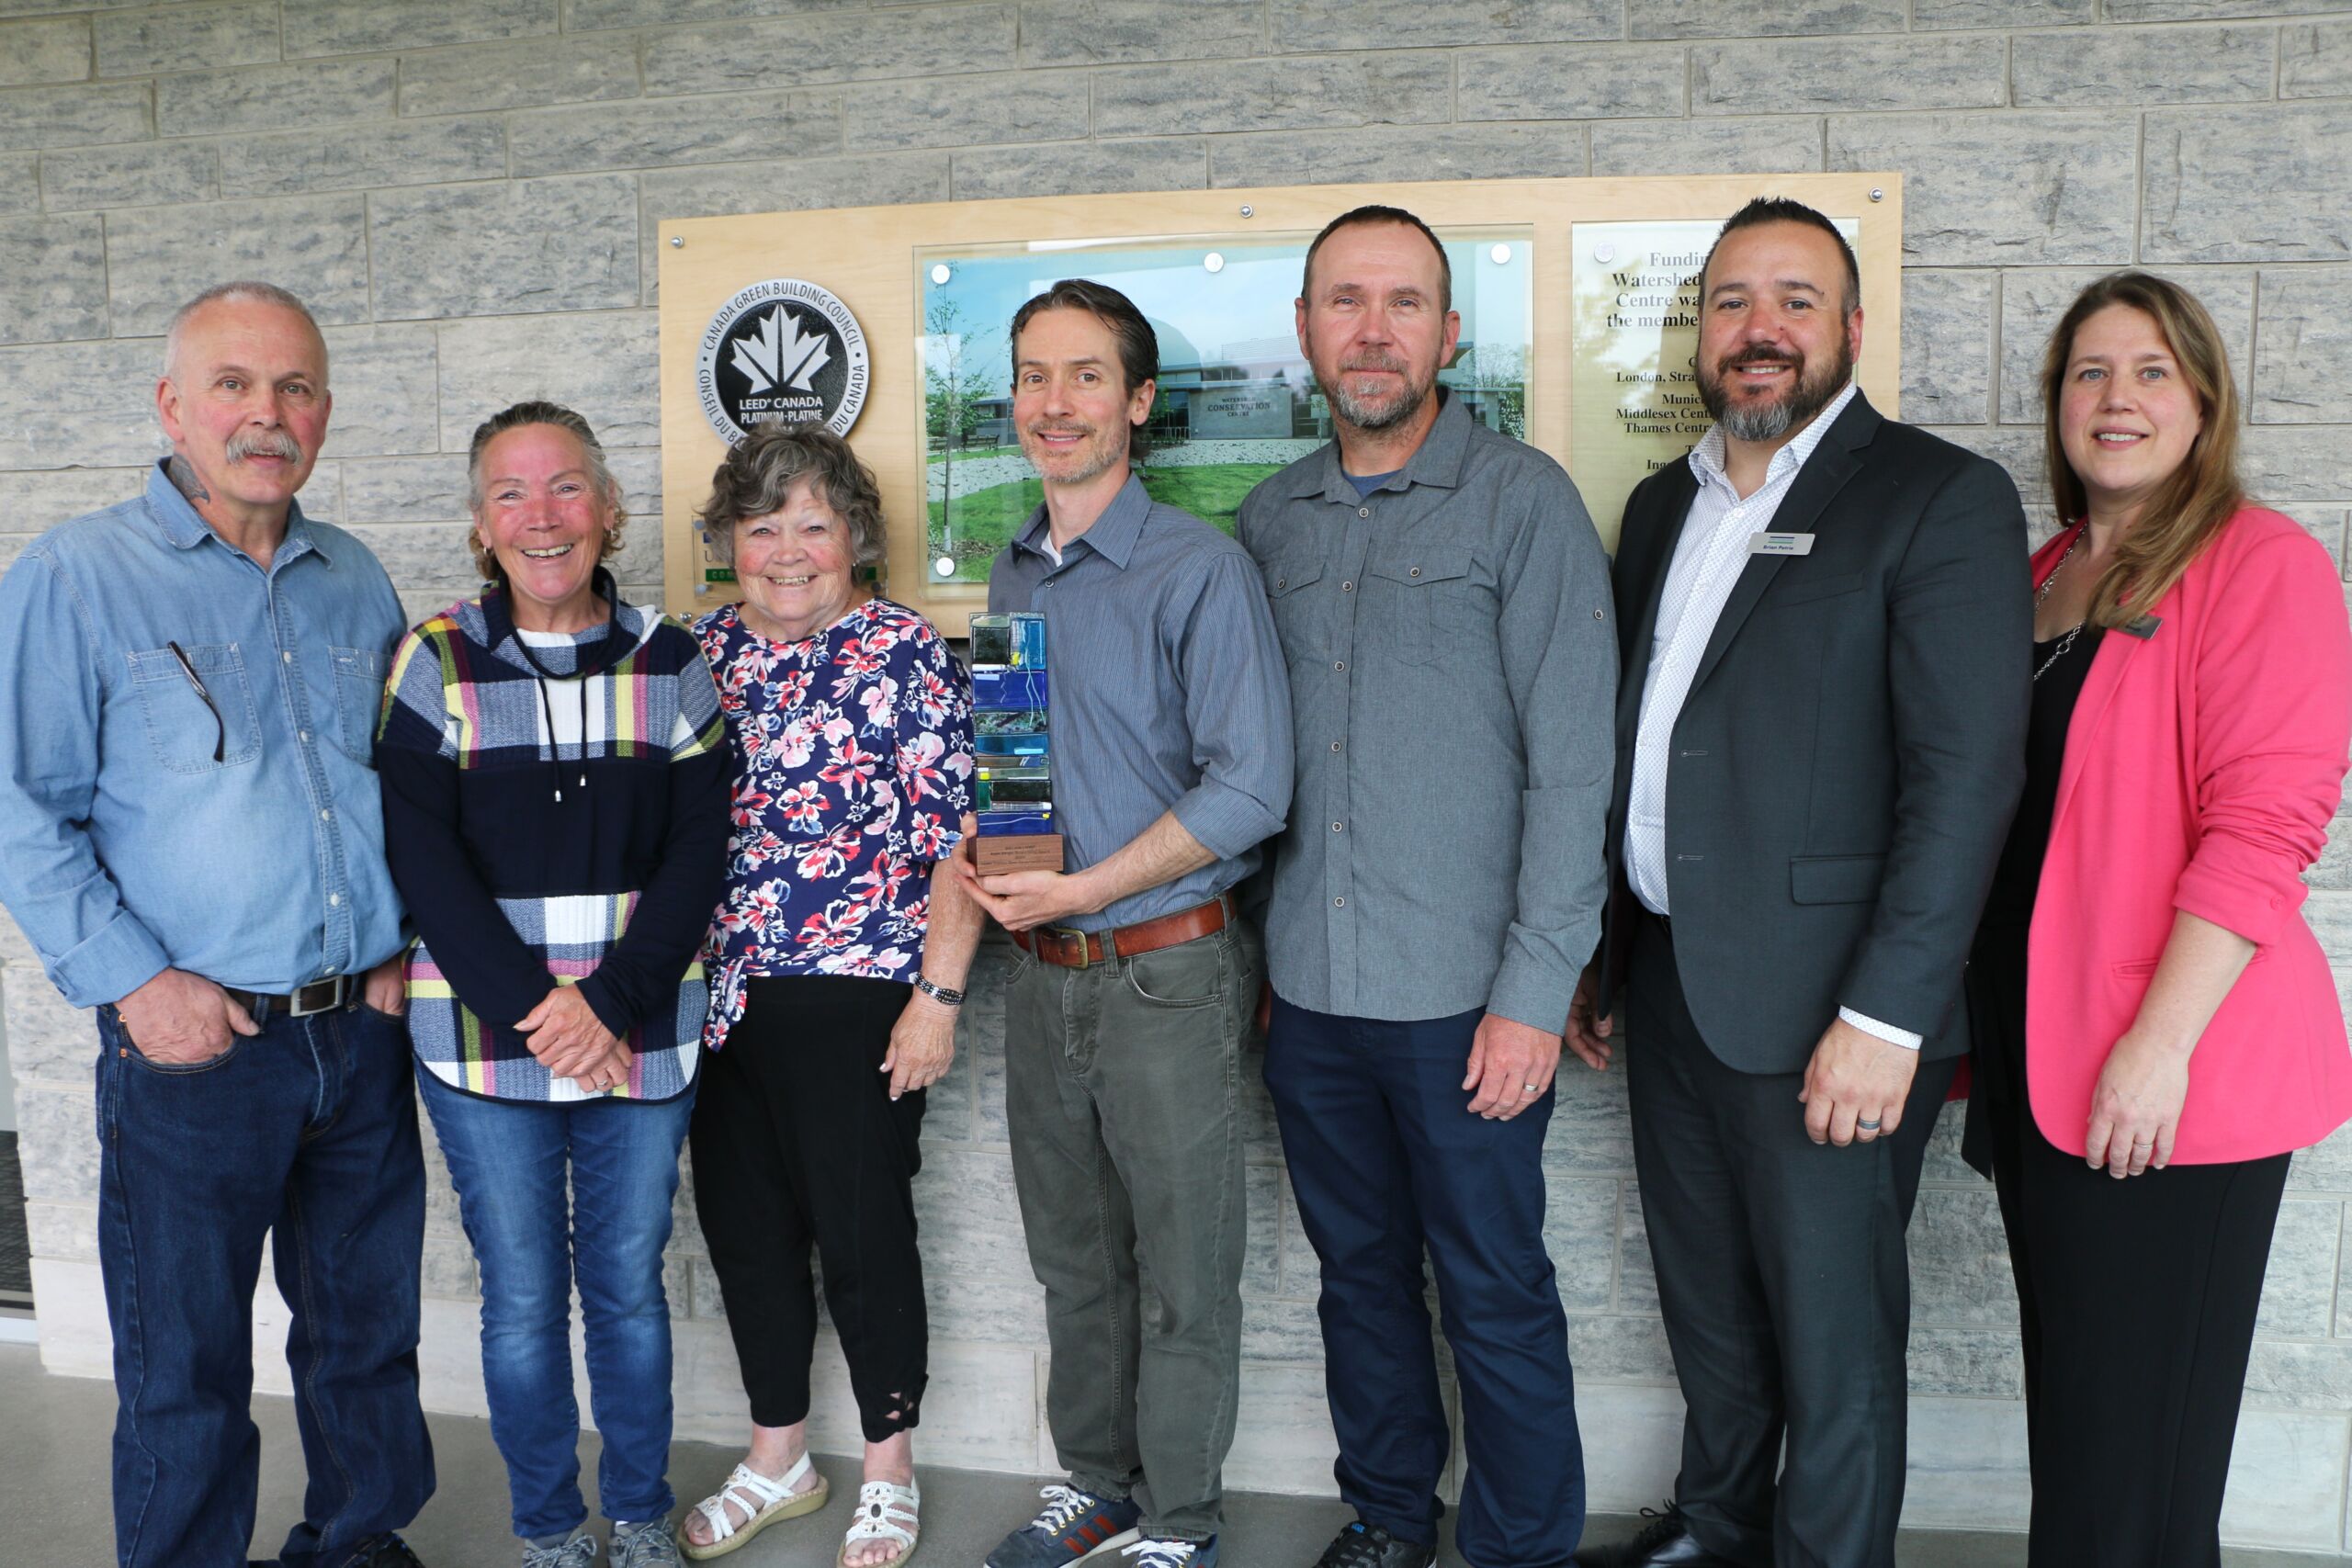 Dave and Wendy Berger (Kayla Berger's parents), Leona Dennis (Kayla Berger‘s grandmother), William Lyons (Award Recipient), Scott Gillingwater (UTRCA Species at Risk Biologist), Chair Brian Petrie (UTRCA Board of Directors), Tracy Annett (UTRCA General Manager)